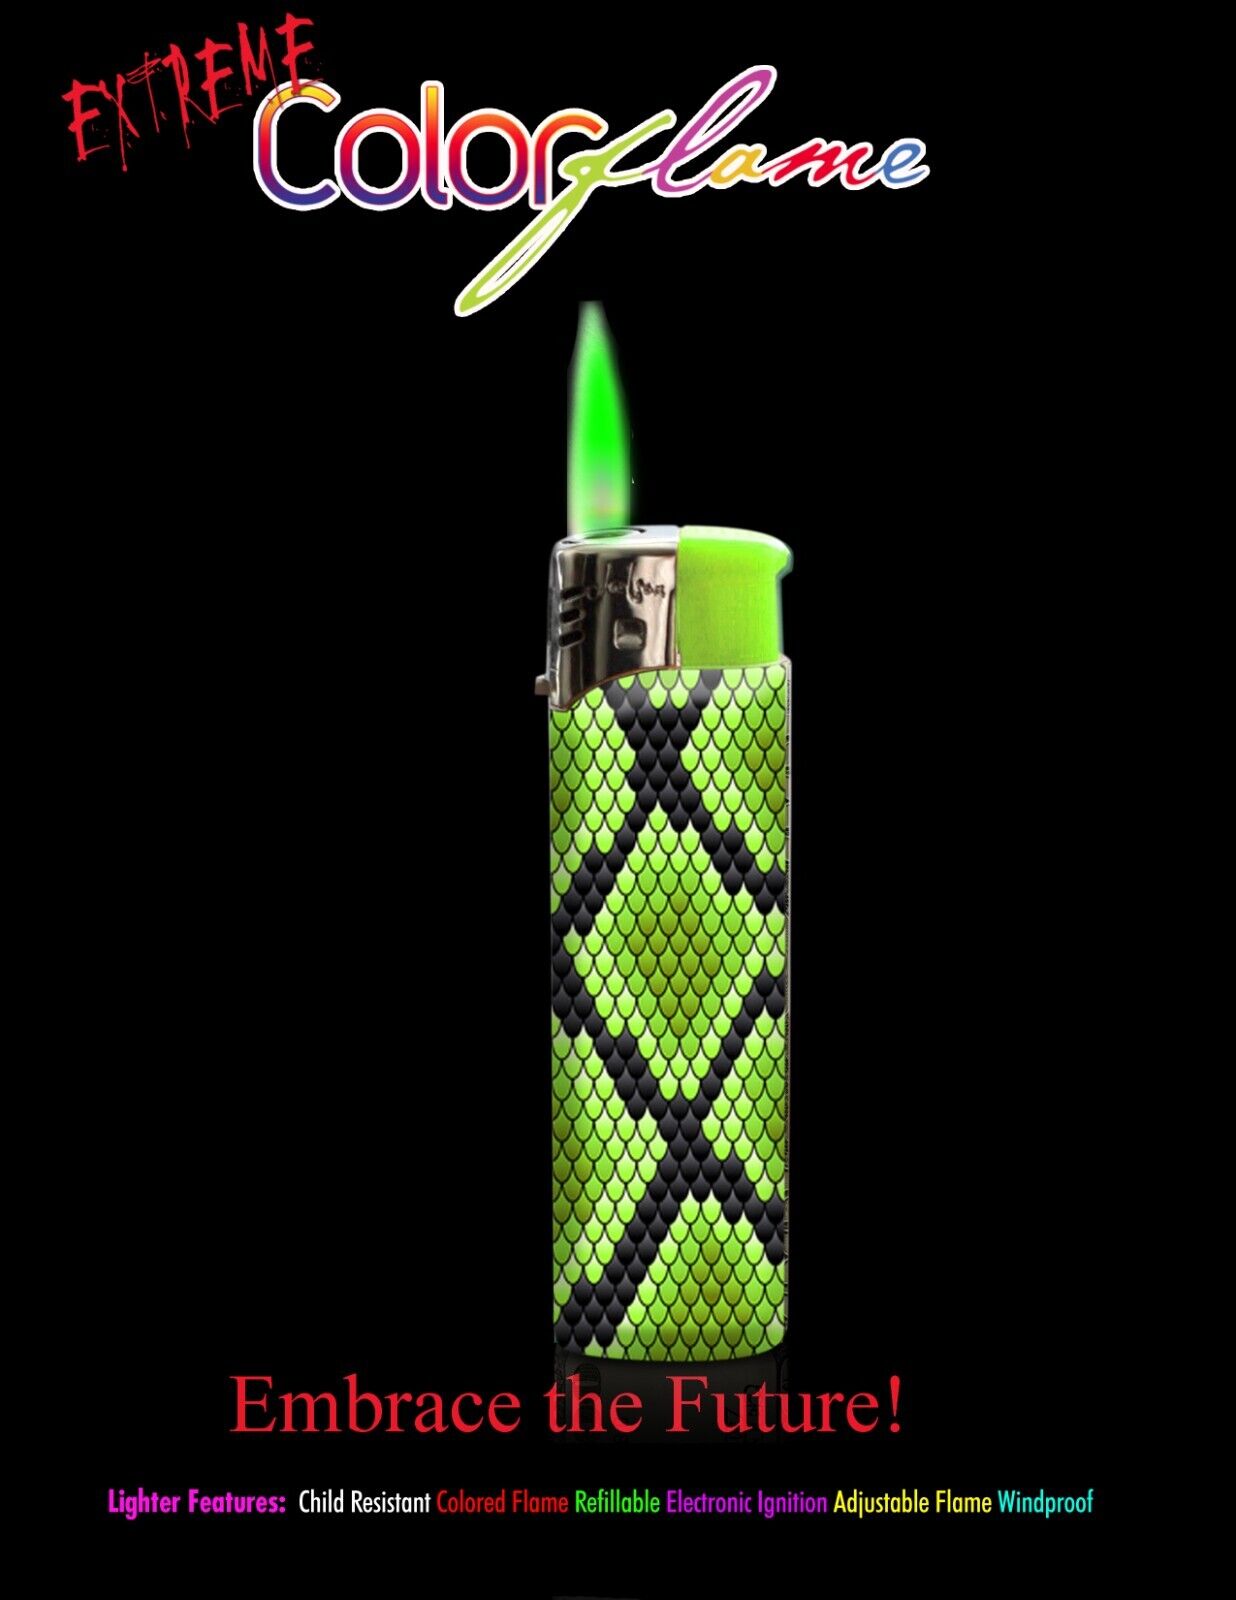 Color Flame Fire Butane Colorflame Colorful Torch Lighter Green Flame Snake Skin